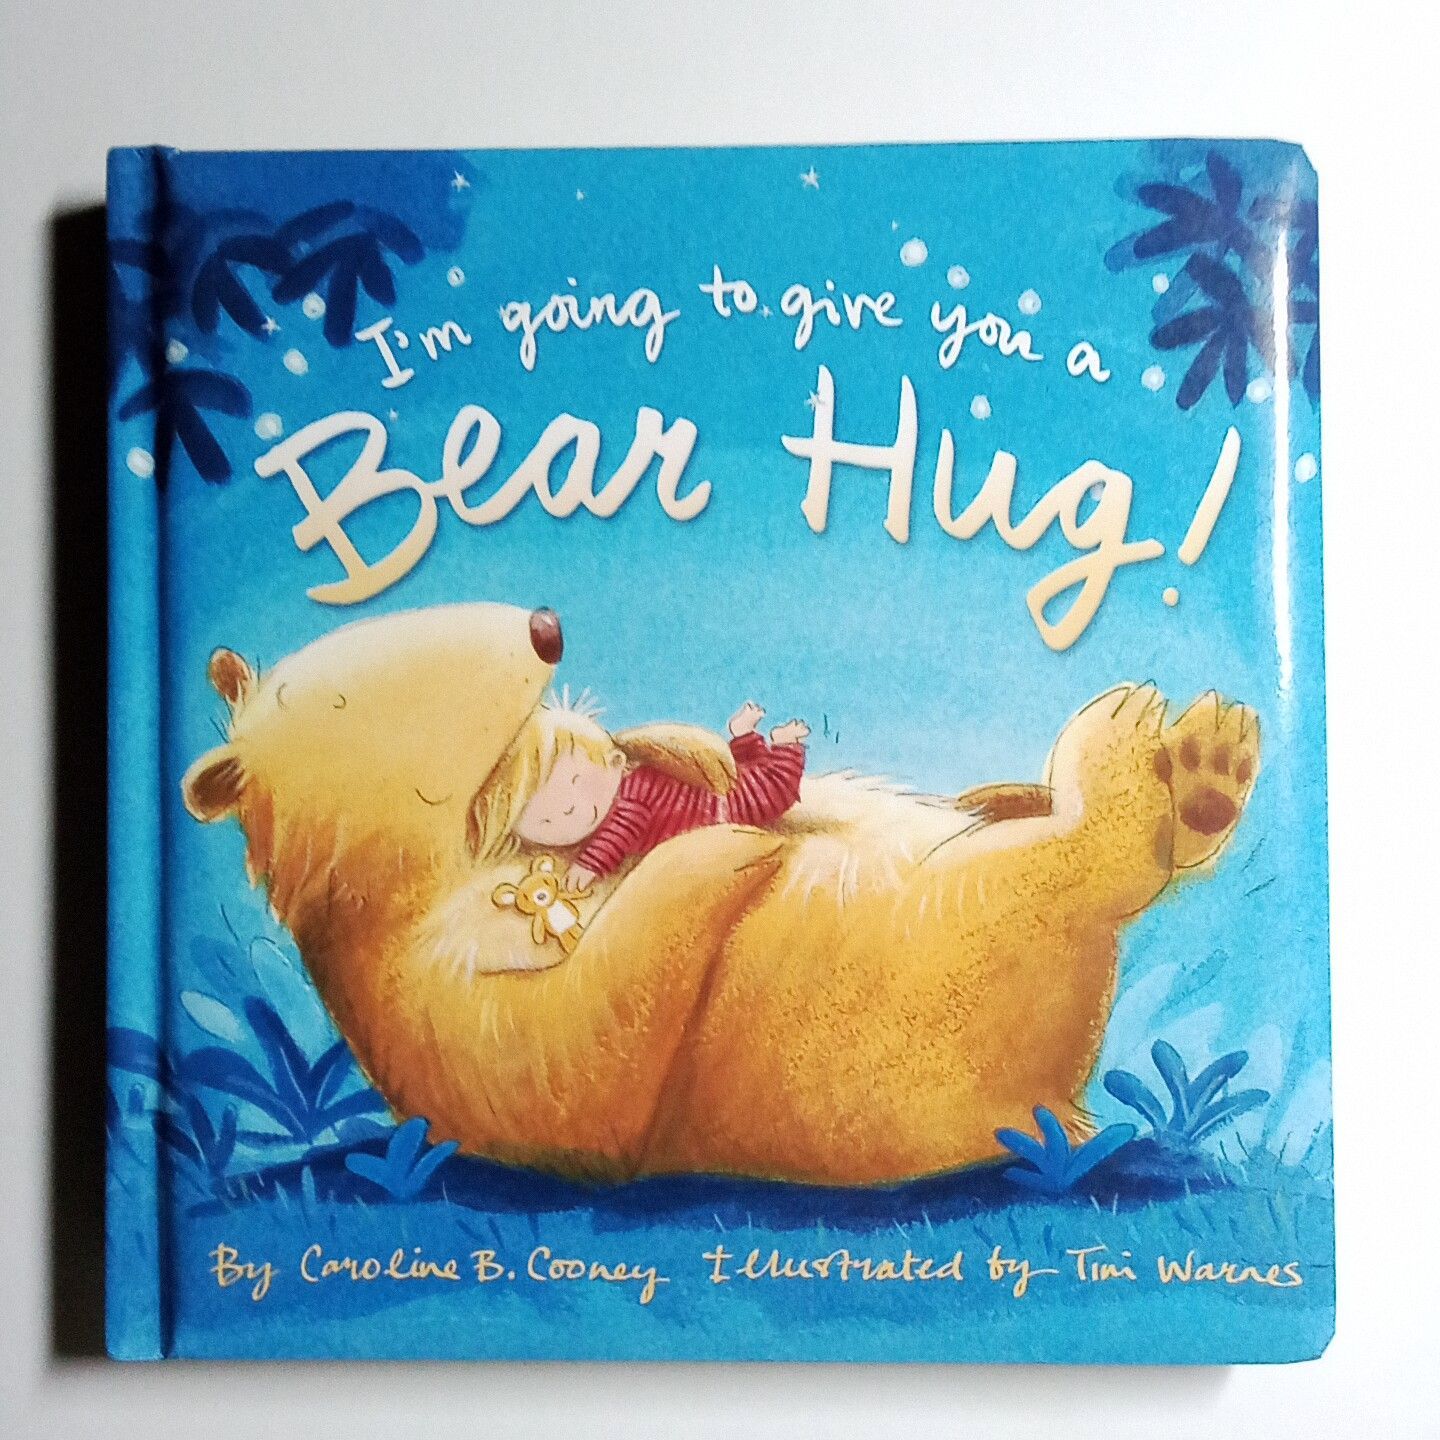 I'm going to give you a Bear Hug! 洋書 絵本 ボードブック 古本